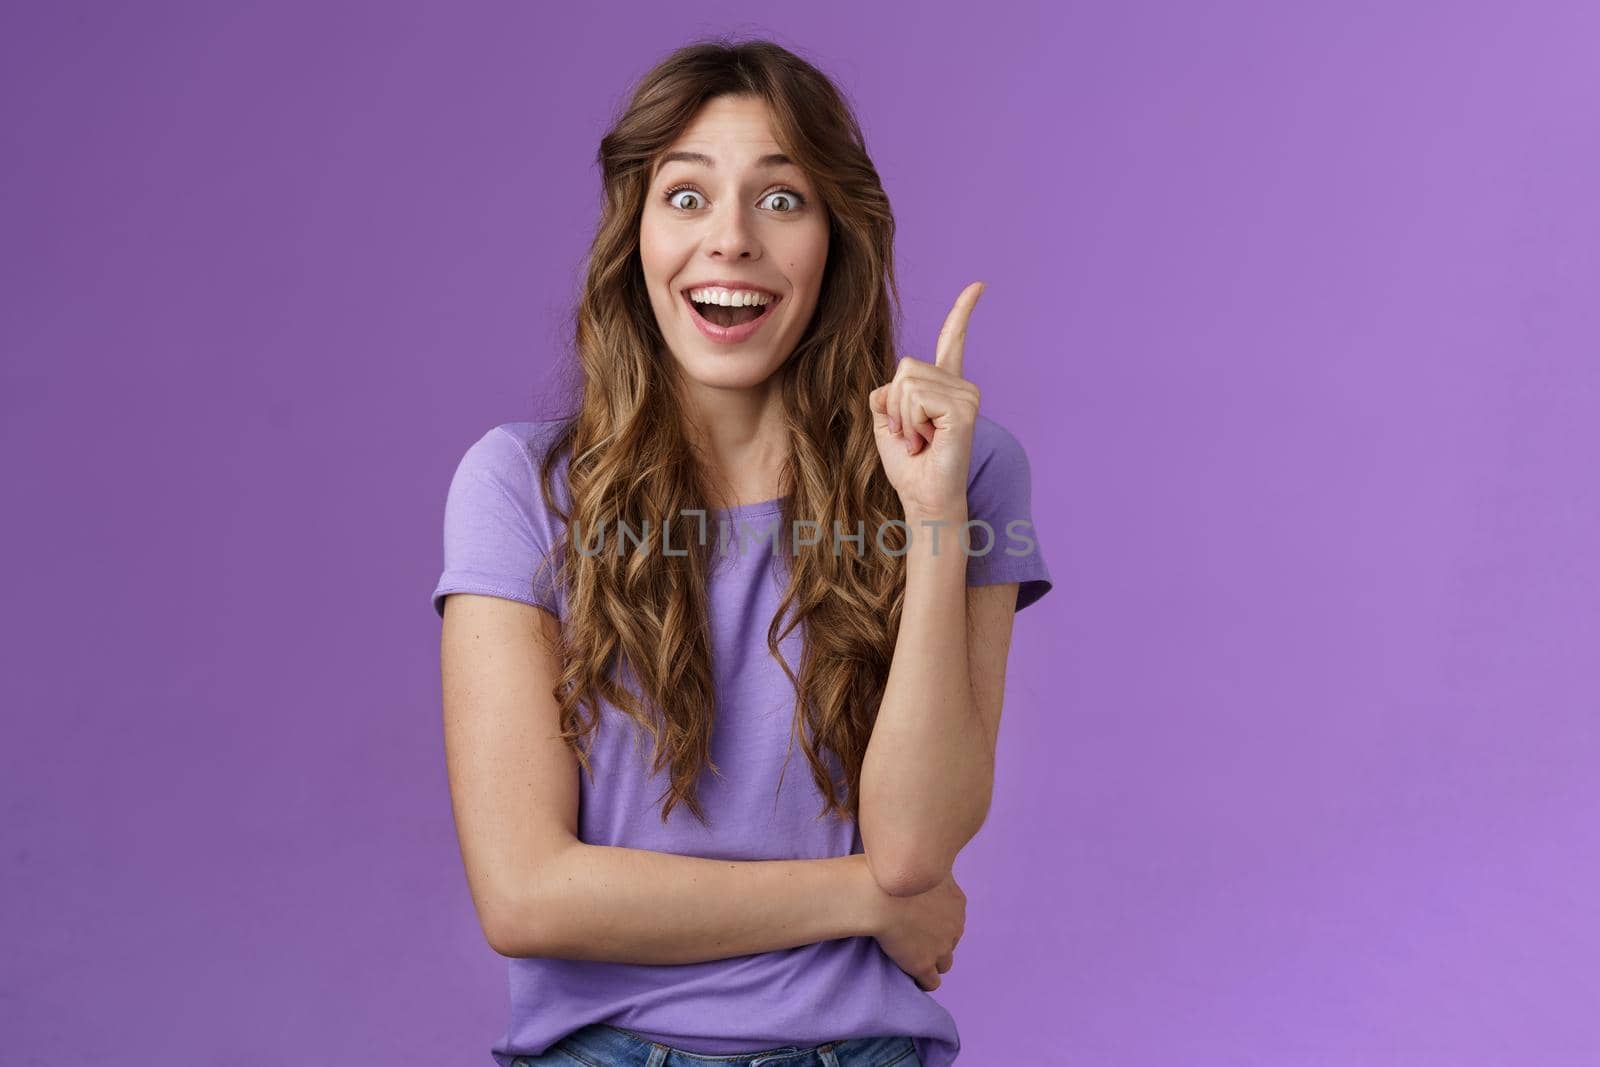 Excited cheerful happy creative smart girl raise index finger eureka gesture smiling broadly stare camera thrilled got excellent idea share suggestion think up perfect solution purple background. Lifestyle.